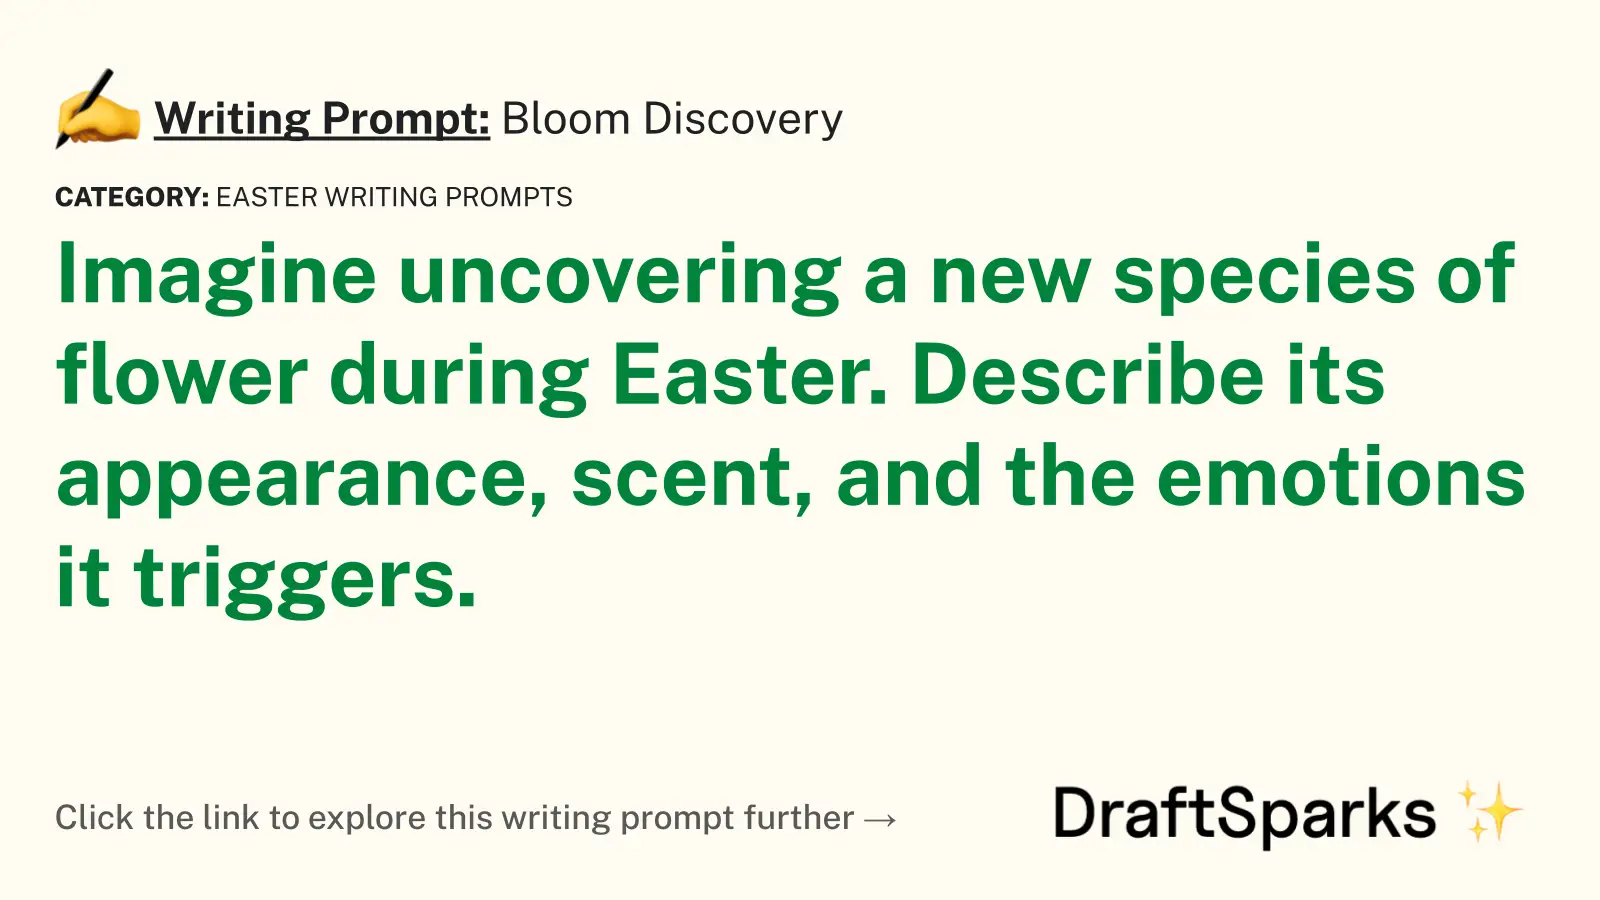 Bloom Discovery